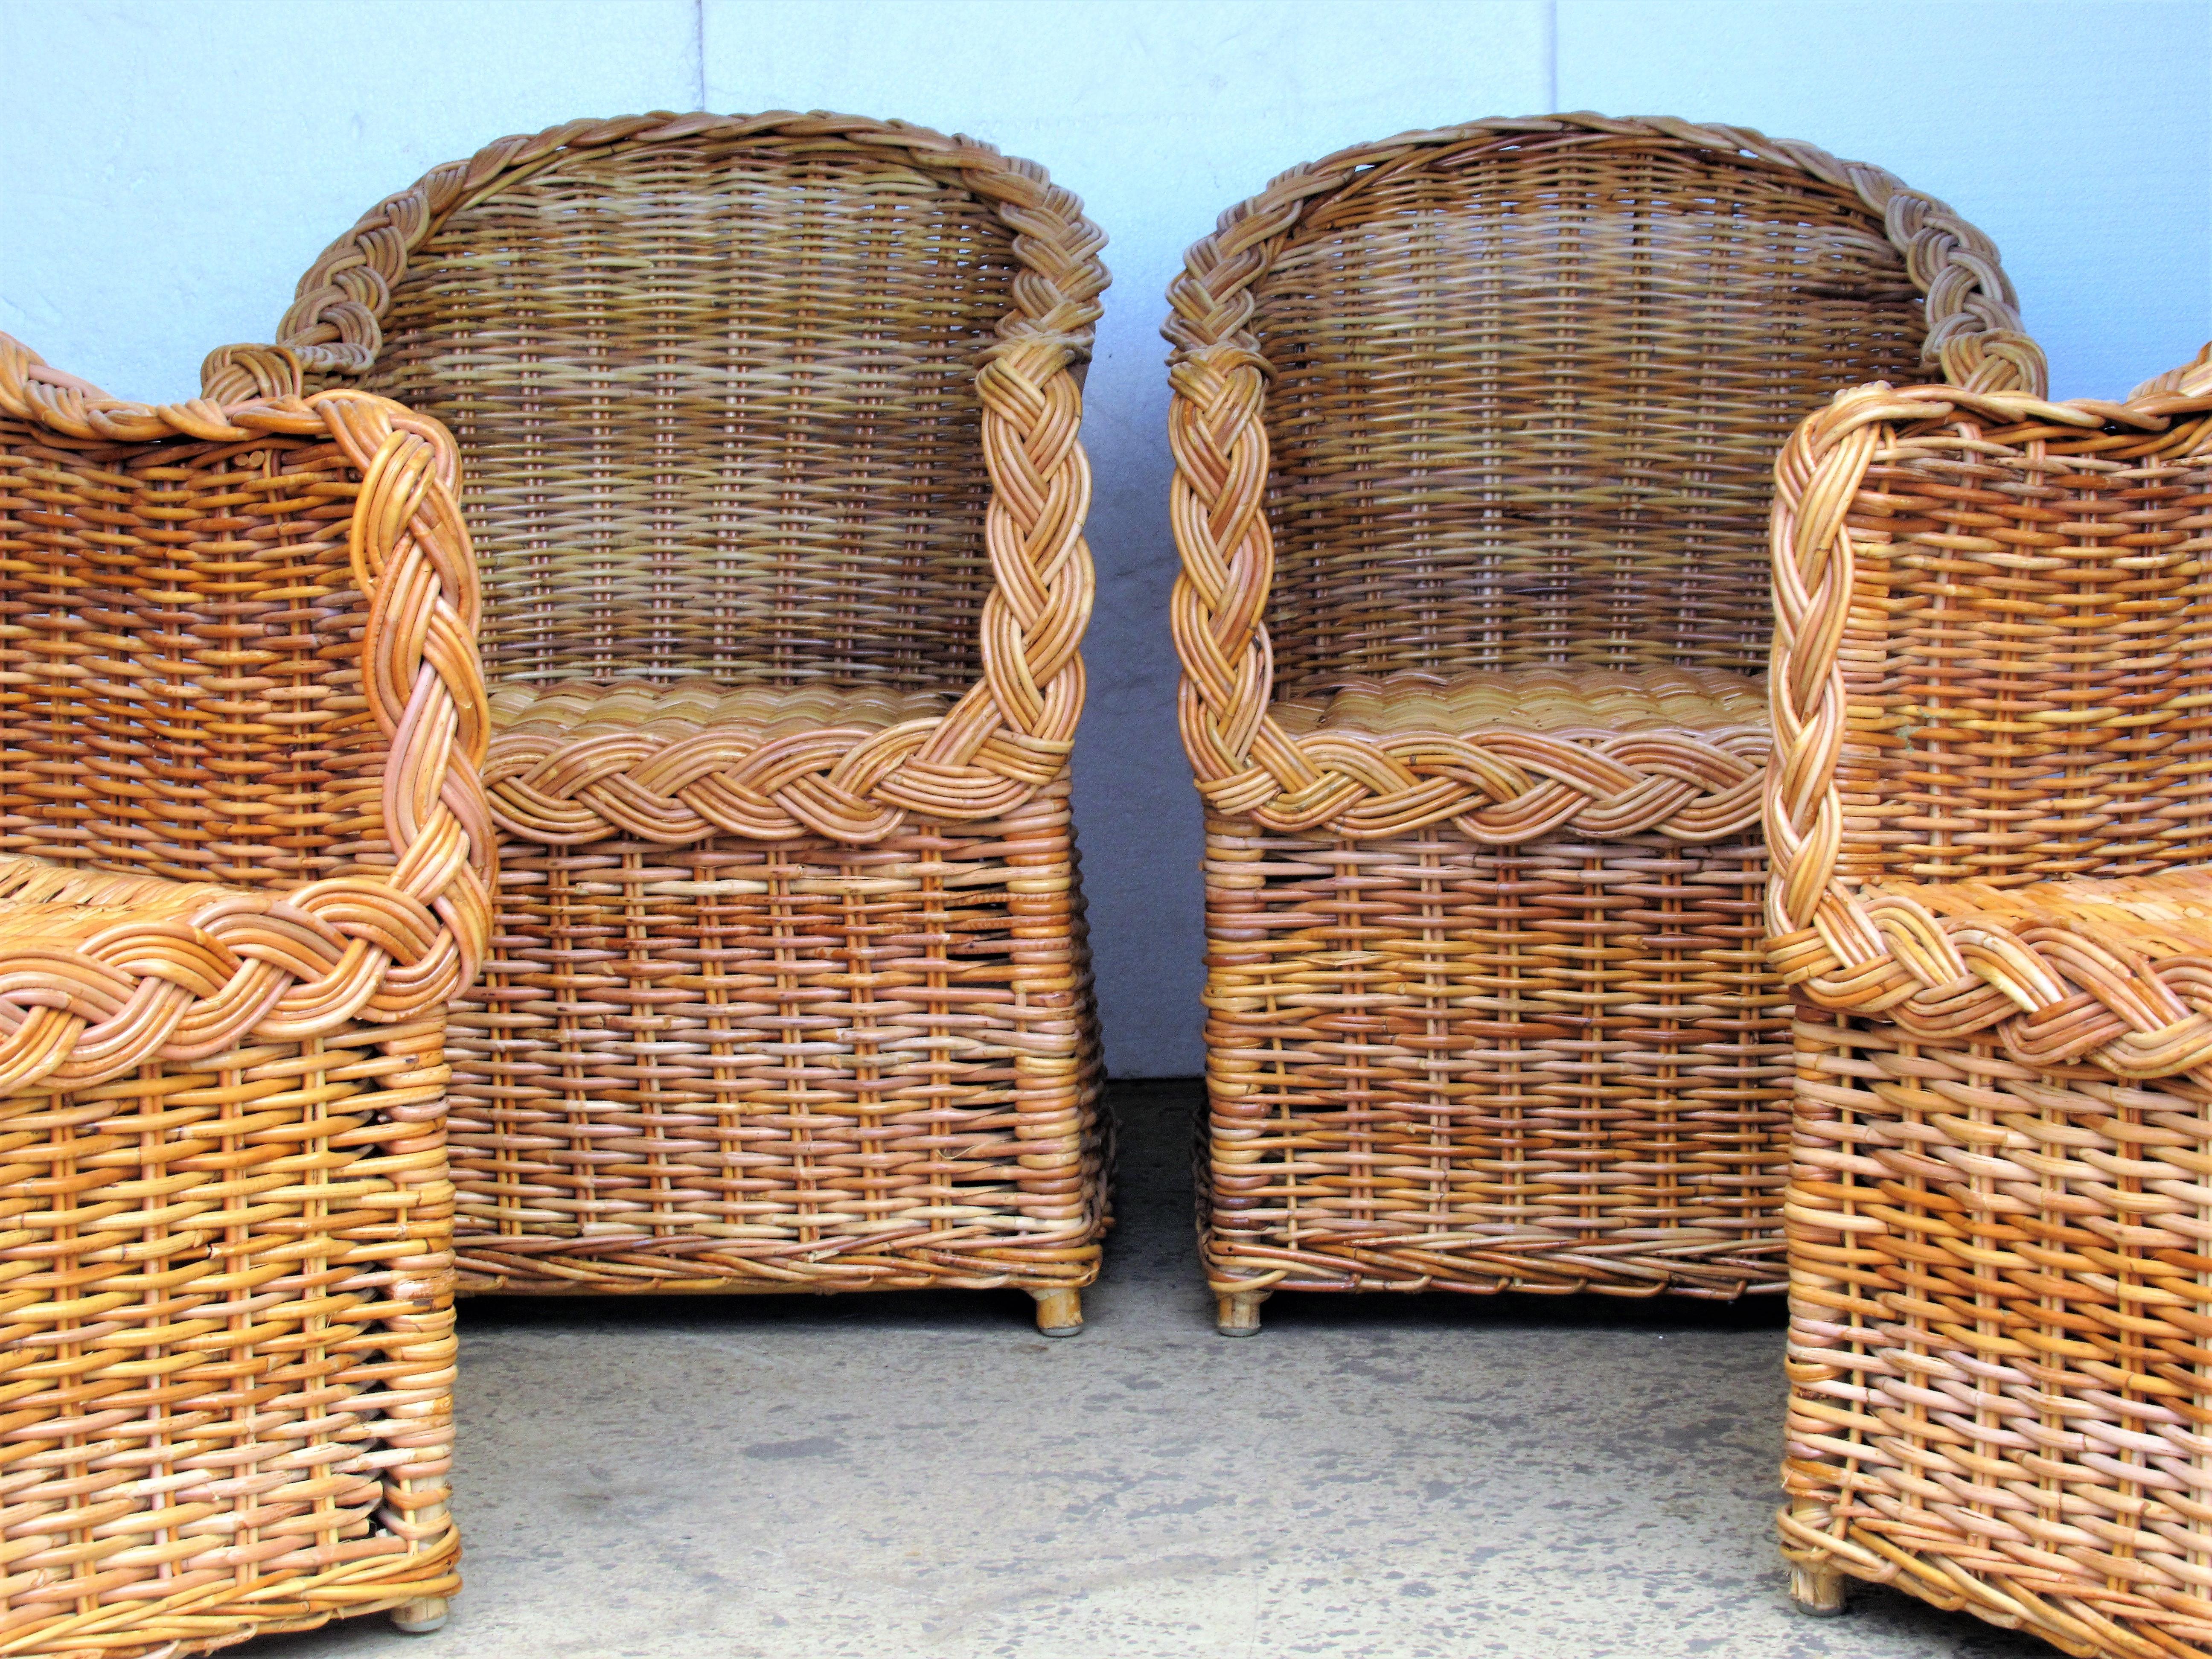 Four matching vintage signed Kreiss Collection natural woven and braided wicker rattan lounge chairs in beautiful glowing honey colored surface. California Modern casual design - circa 1970. Look at all pictures and read condition report in comment